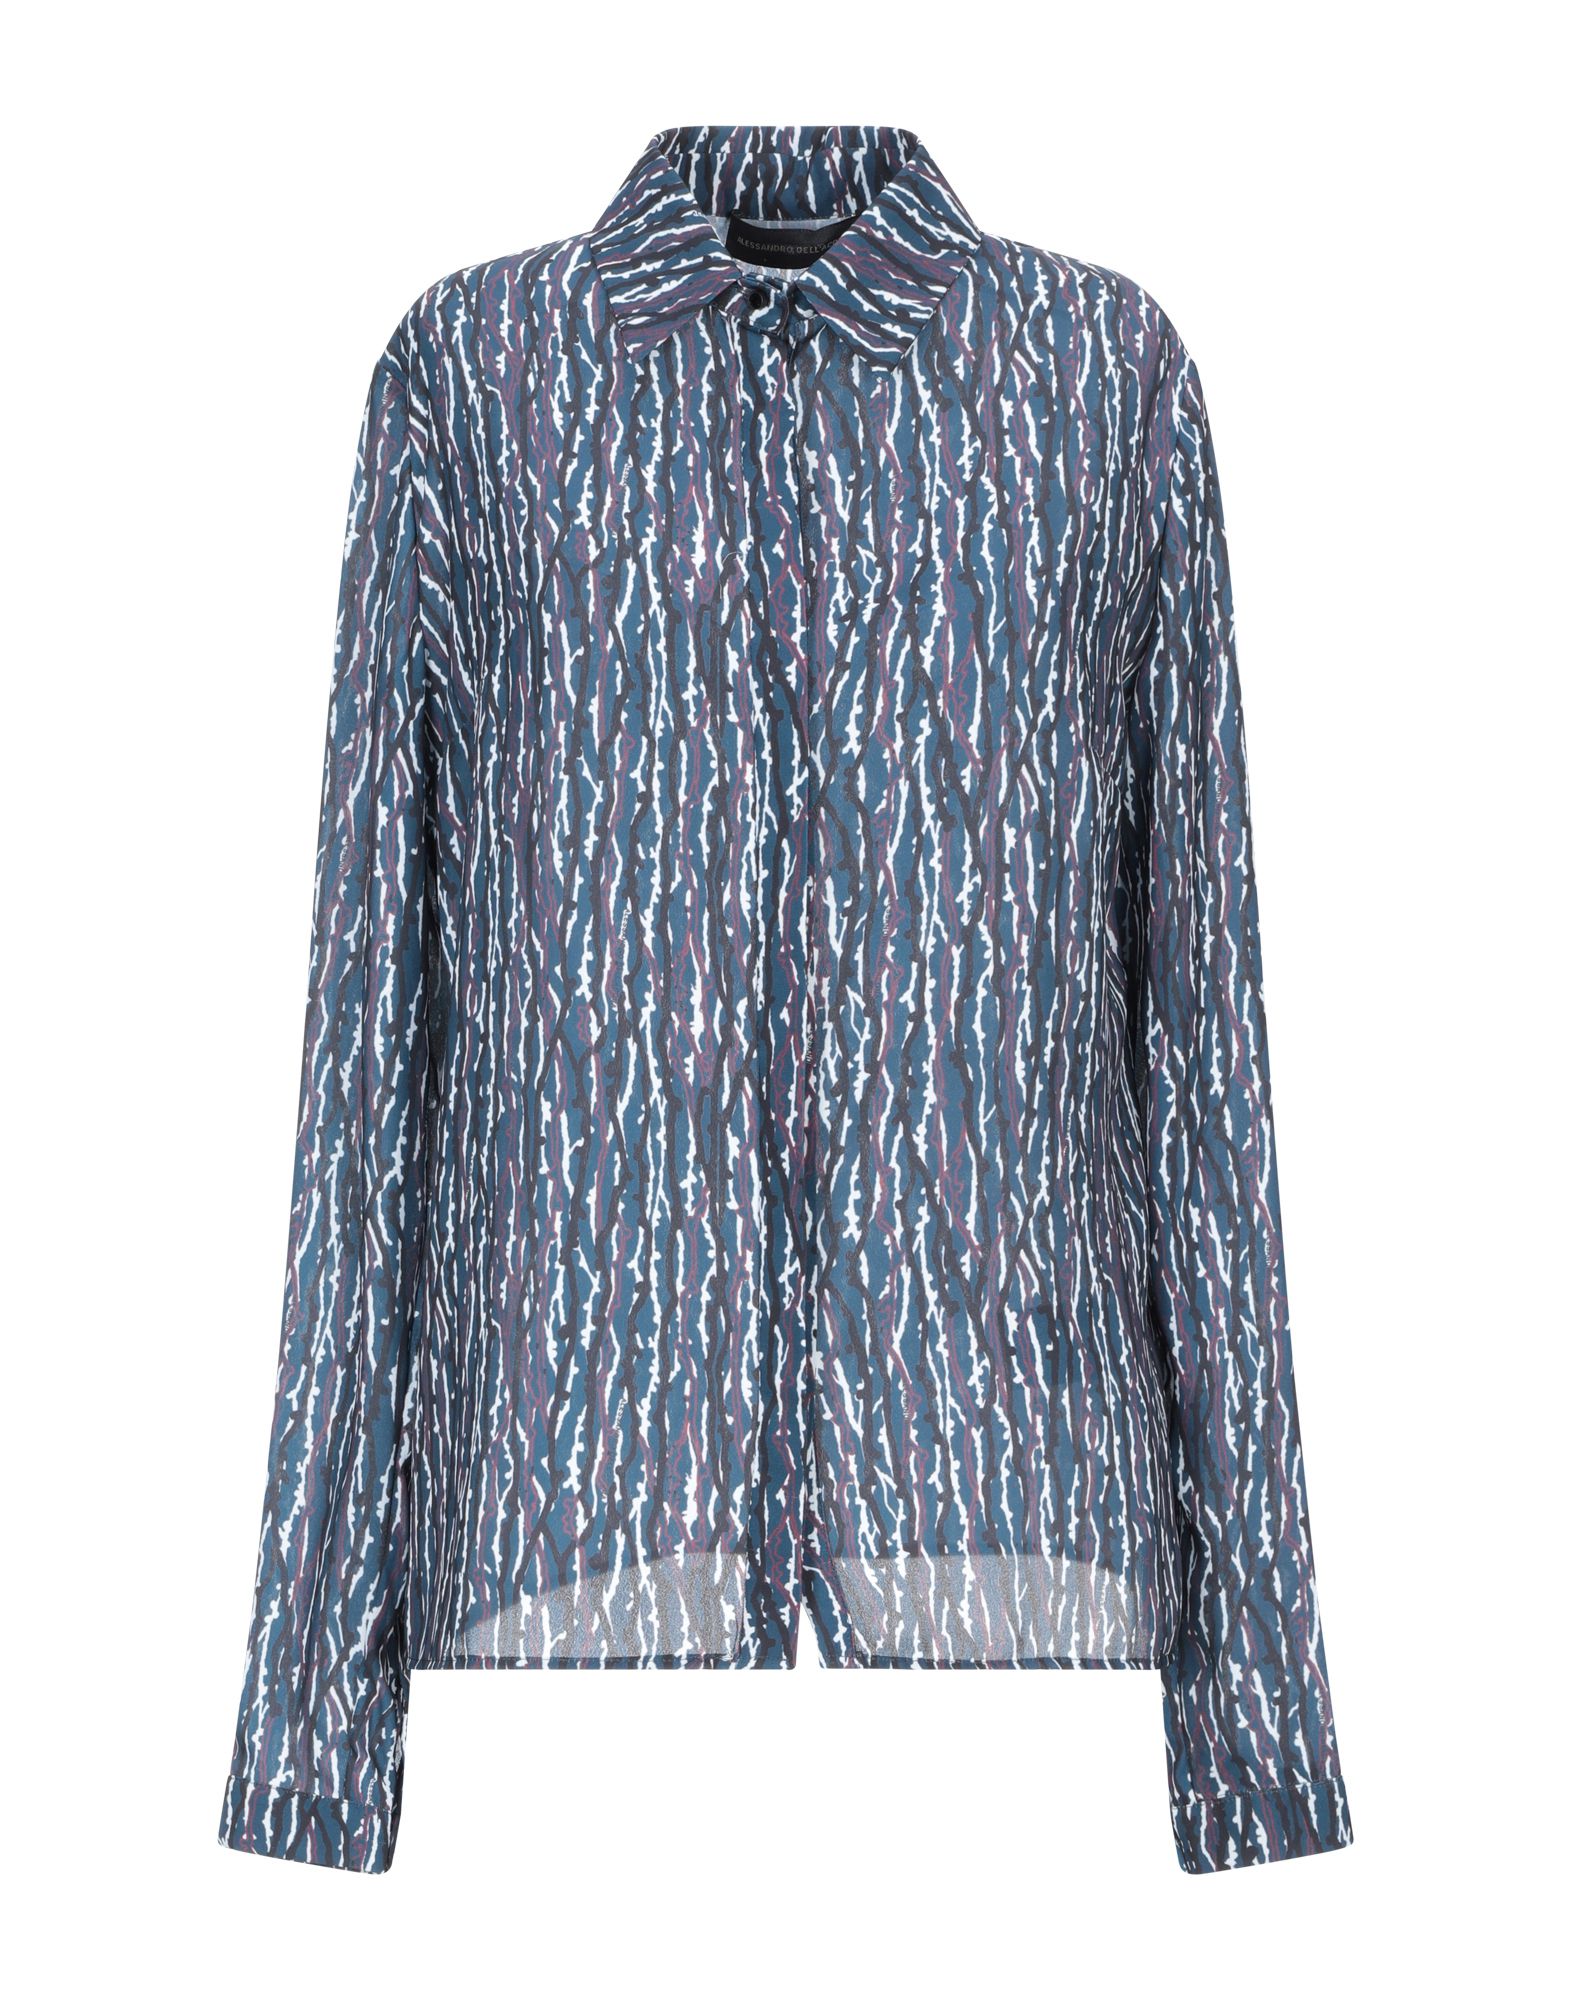 ALESSANDRO DELL'ACQUA Patterned shirts & blouses,38834543XK 3